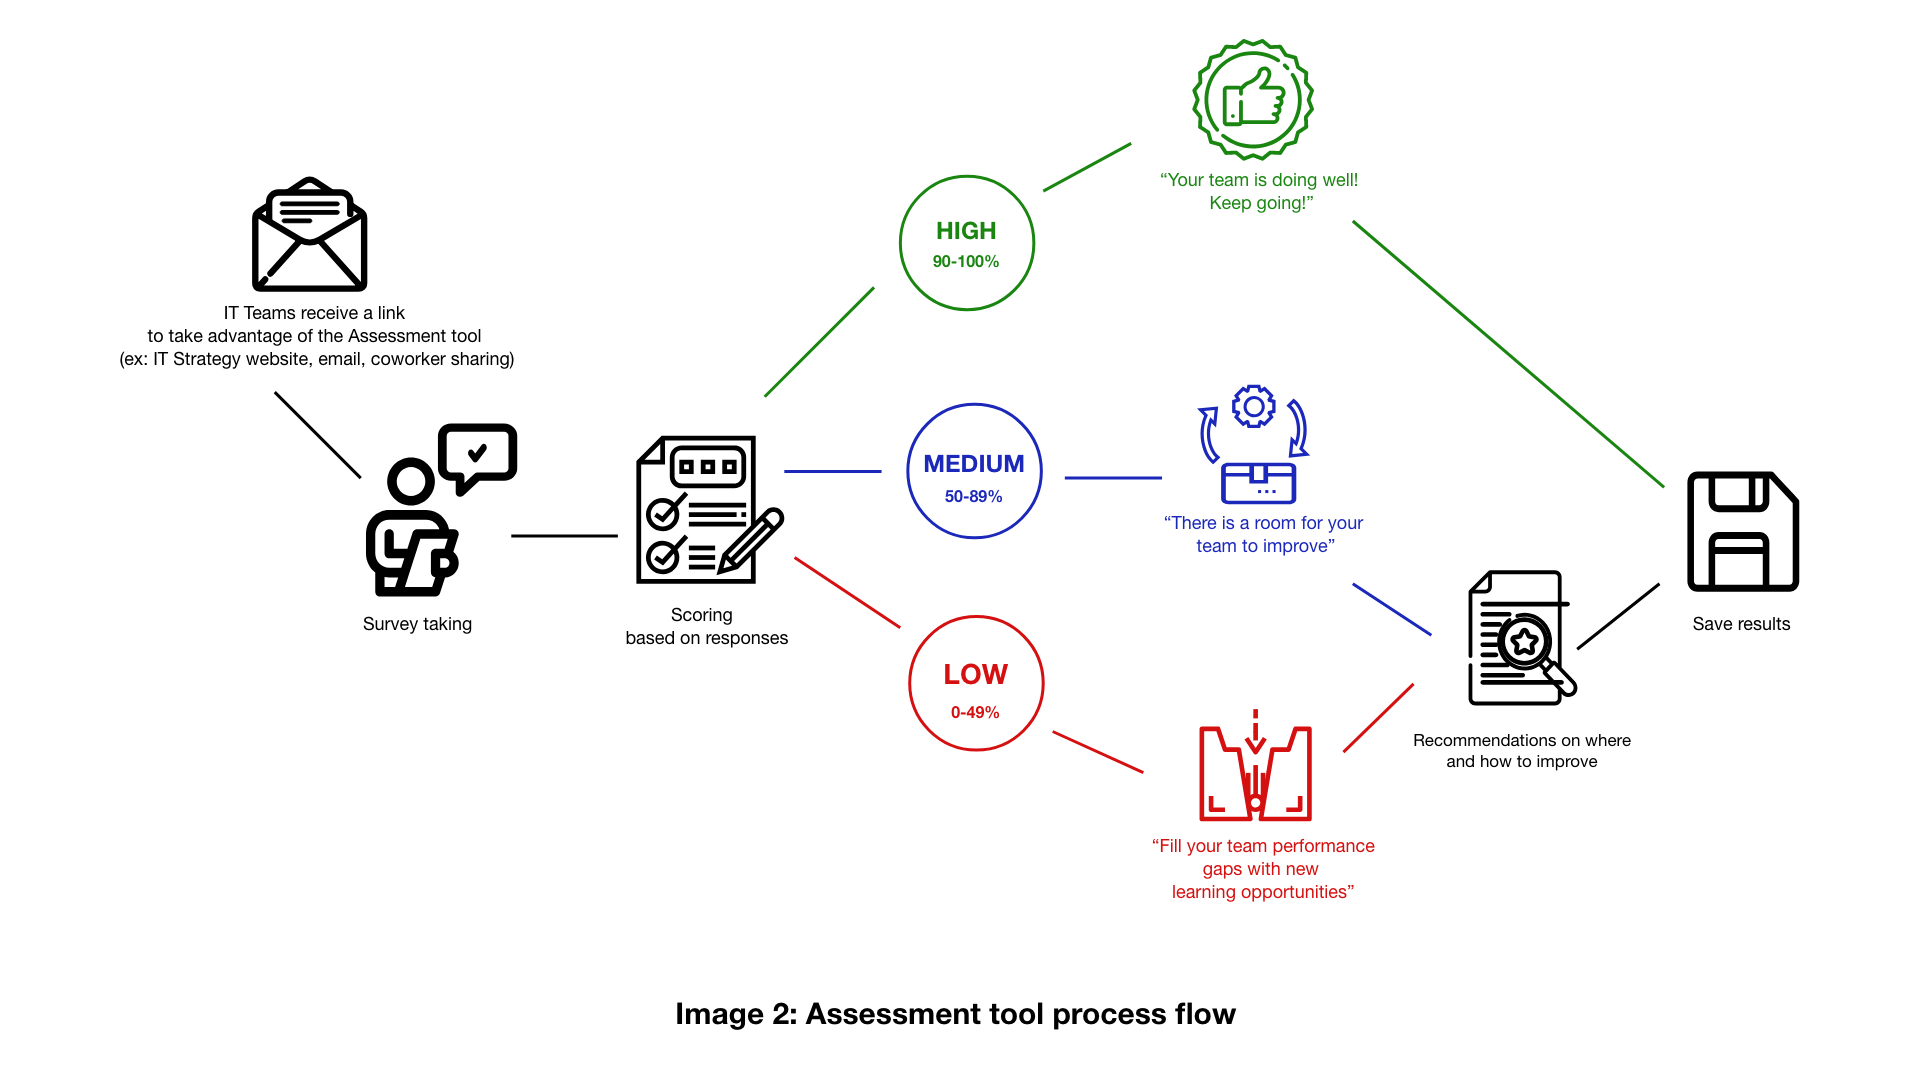 A graphic with 11 elements demonstrating assessment process flow.
It expands from left to right.
The first element is an envelop icon with the text "IT teams receive a link to take an advantage of the assessment tool" connected to a surveyor filling out a survey icon with the text "Survey taking" which is connected next to a paper with check marks icon represented as a survey with the text "Scoring based on responses".
The survey icon is connected to 3 circles.
The circle titles are: top "High 90-100%" which is connected to thumps up icon with text "Your team is doing well! Keep going!"; middle "Medium 50-89%" which is connected to the icon with a box and two arrows above with the text "There is a room for your team to improve"; bottom: "Low 0-49%" which is connected to an icon with two boxes with a space between and arrow down above the space with the text "Fill your team performance gaps with new learning opportunities".
The last two circles with the title "Low" and "Medium" with the following icons are connected to the icon with the paper and magnifying glass on it.
This icon has a text "Recommendations on where and how to improve".
At the end, all of three circles with following icons are connected to a floppy disk icon with the text "Save results".
